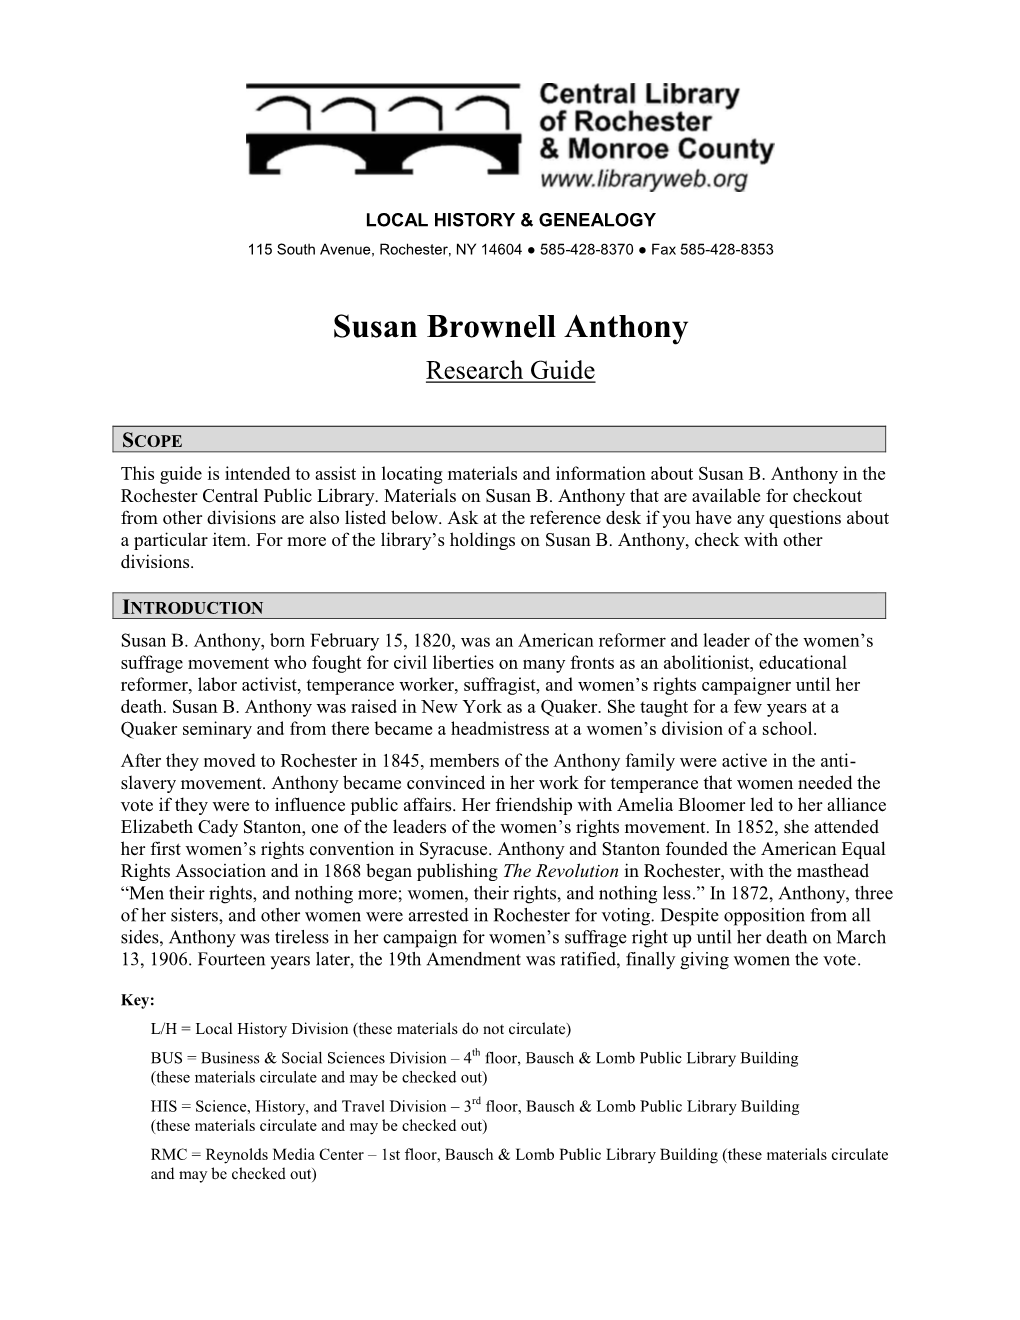 Susan Brownell Anthony Research Guide